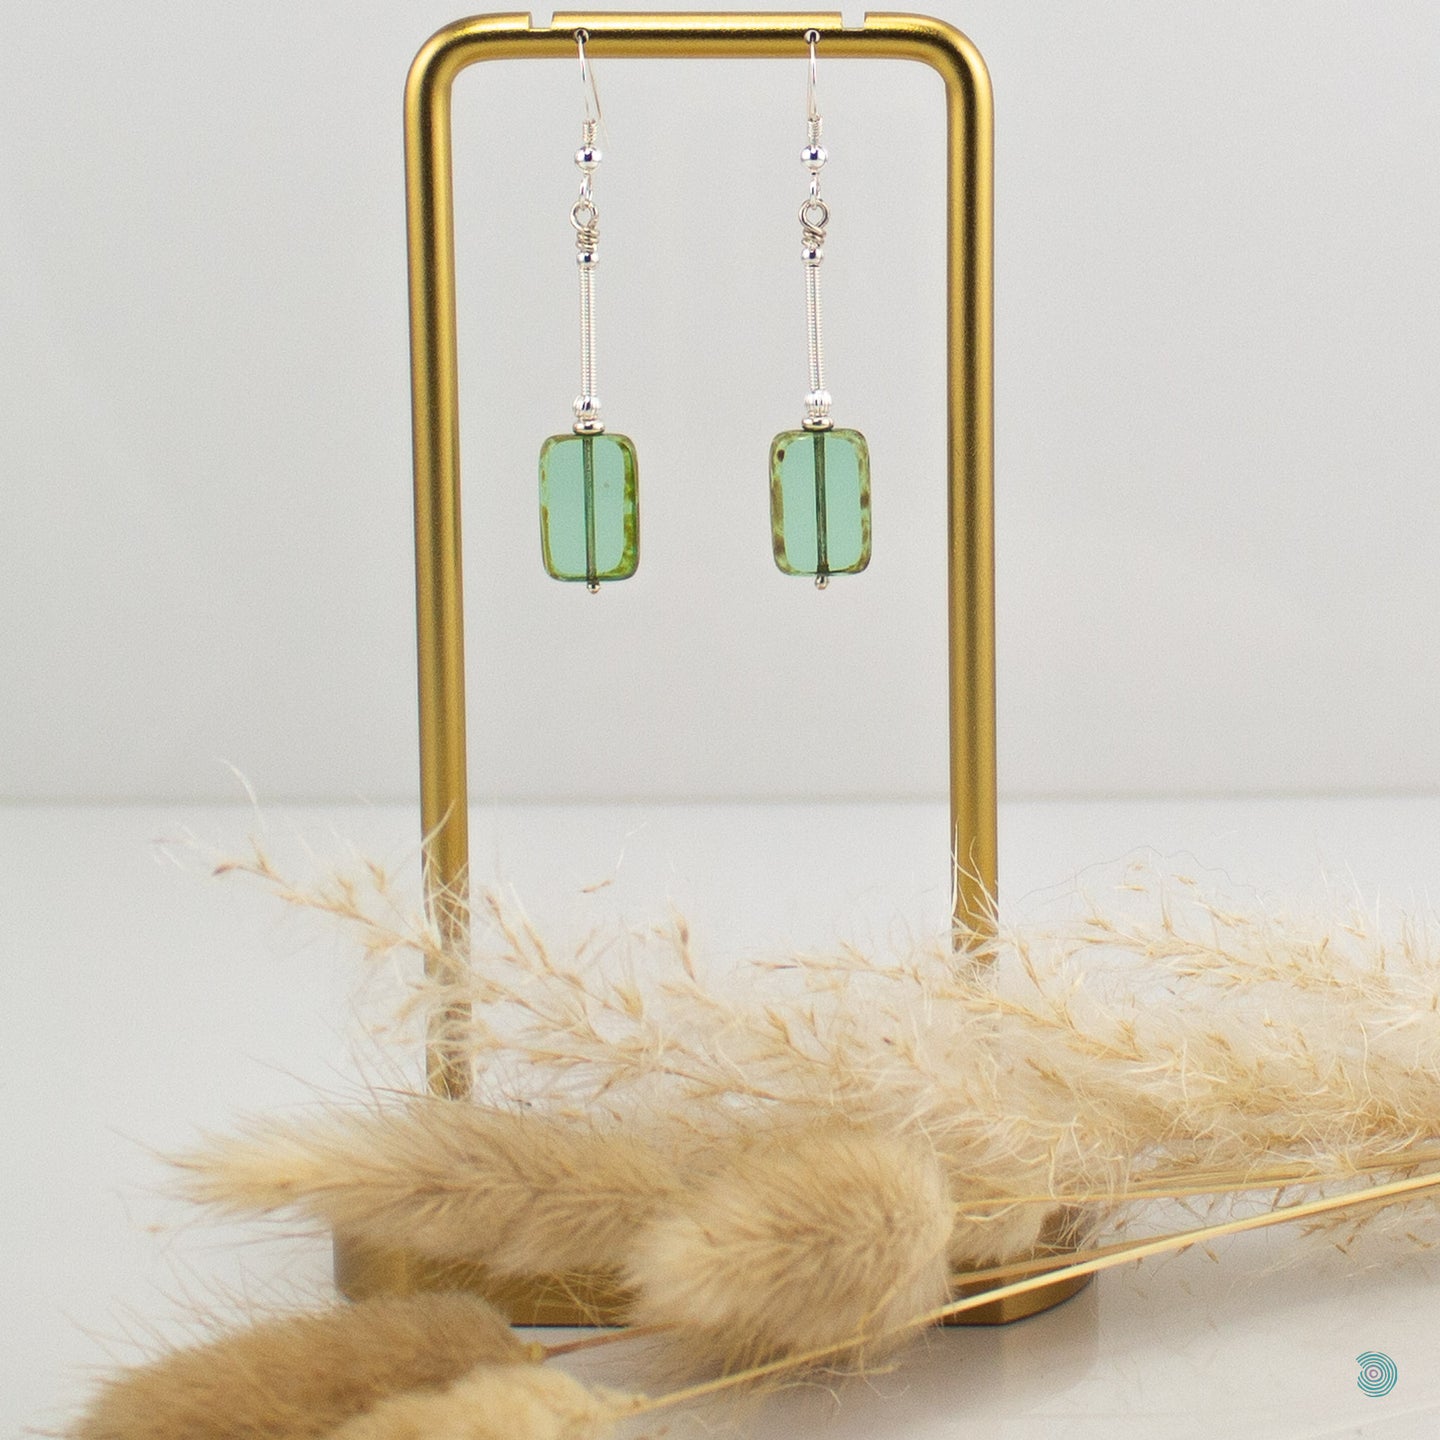 Hand wrapped silver filled drop earrings with a beautiful green Czech glass rectangular bead. These earrings sit on sterling silver ear wires and come with backs included. They are approximately 4cm in drop length from the base of the ear wires and are presented in a pretty gift pouch for safe keeping. Designed and handmade in Dingle